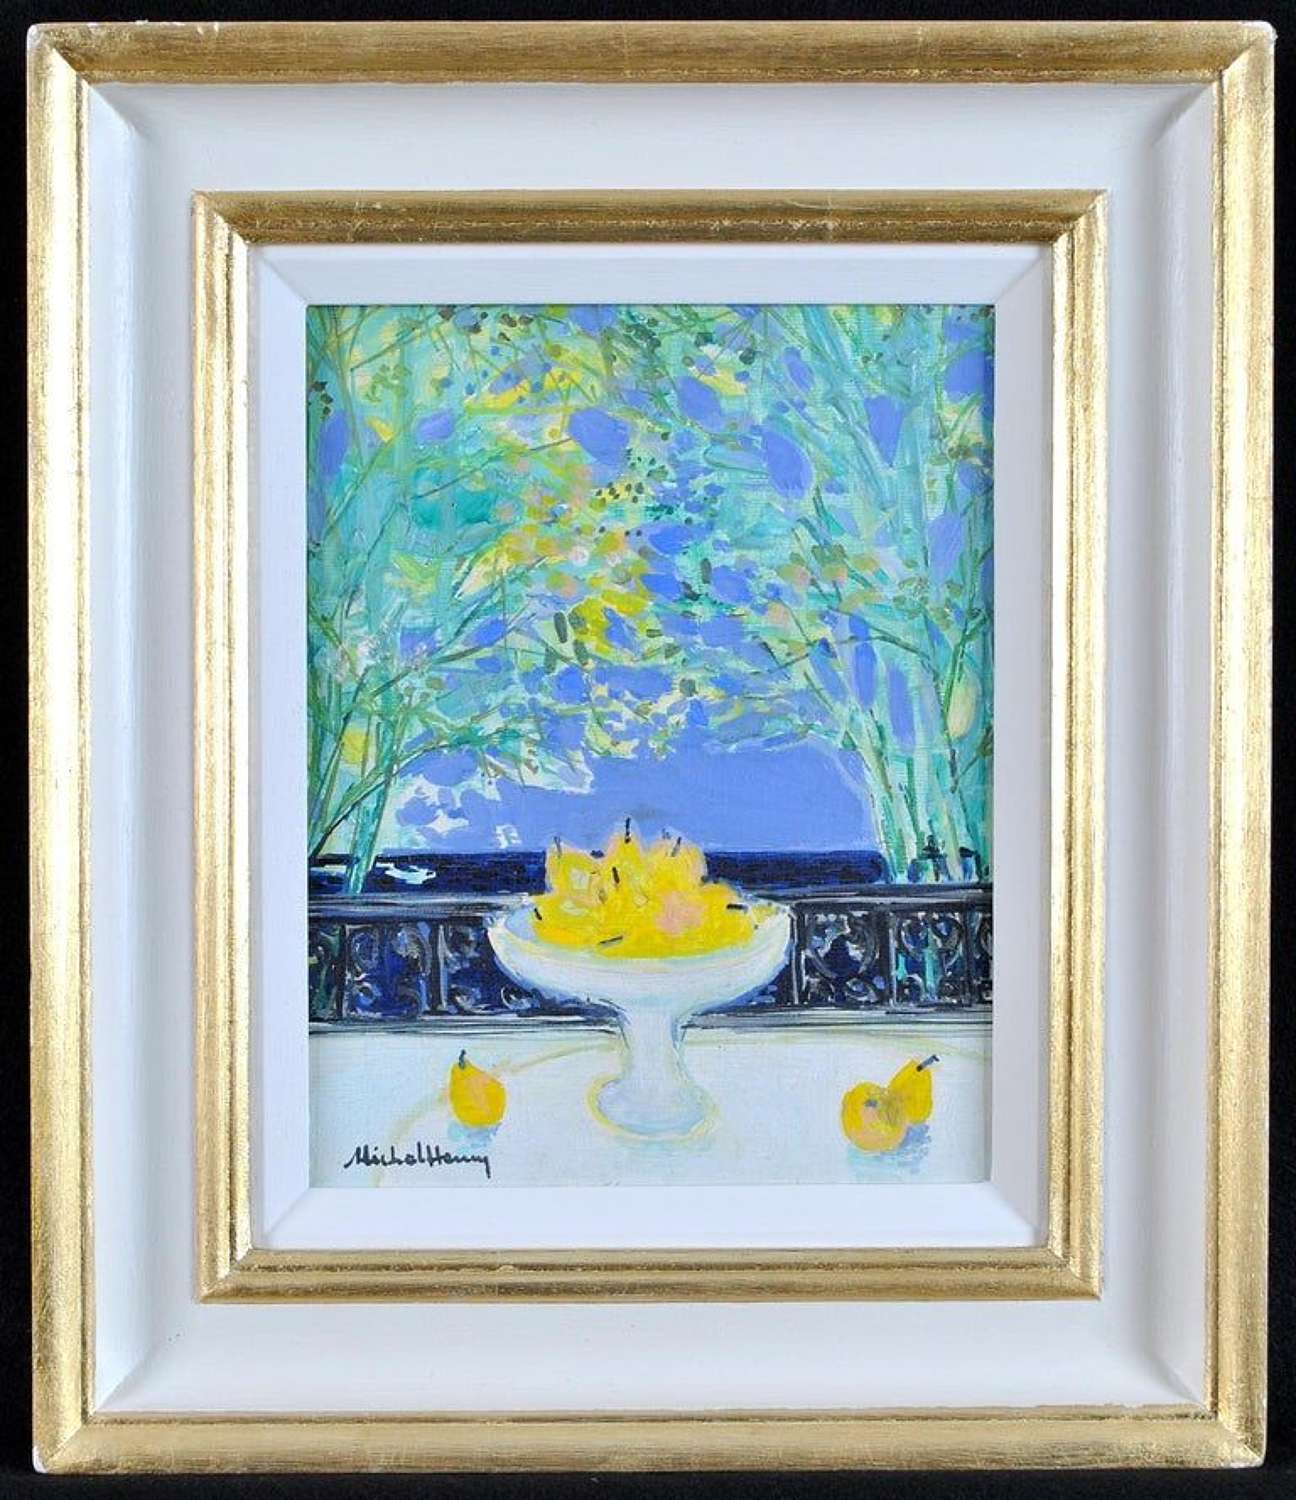 Michel Henry (1928-2016) Pears on a Balcony, Oil on Canvas